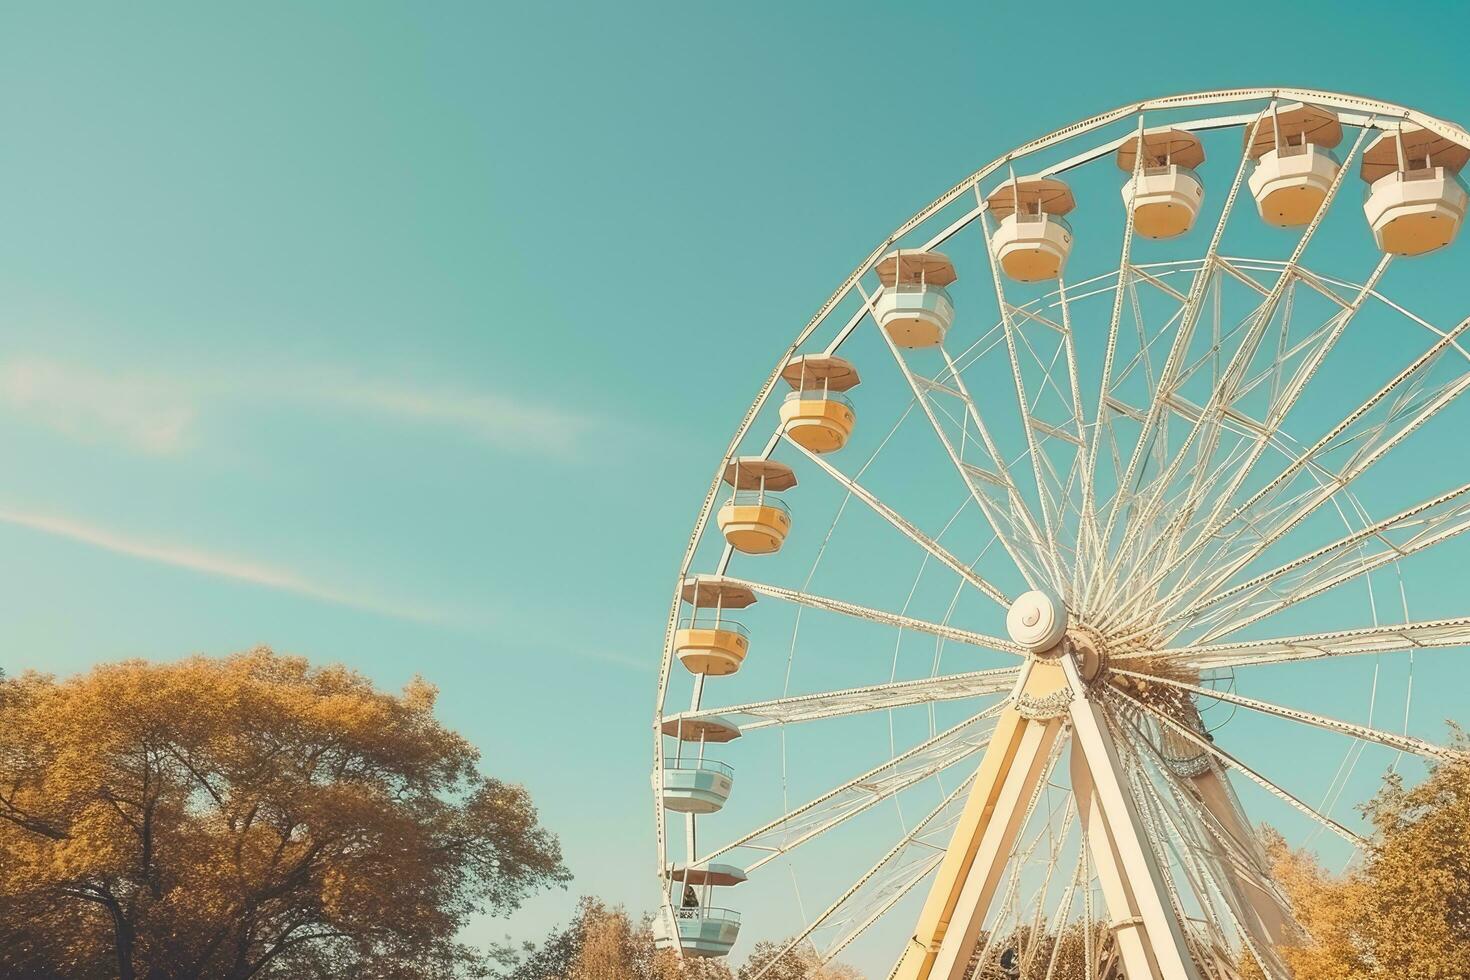 Ferris wheel in the park - retro vintage effect style pictures, Vintage ferris wheel on blue sky background in the park, AI Generated photo